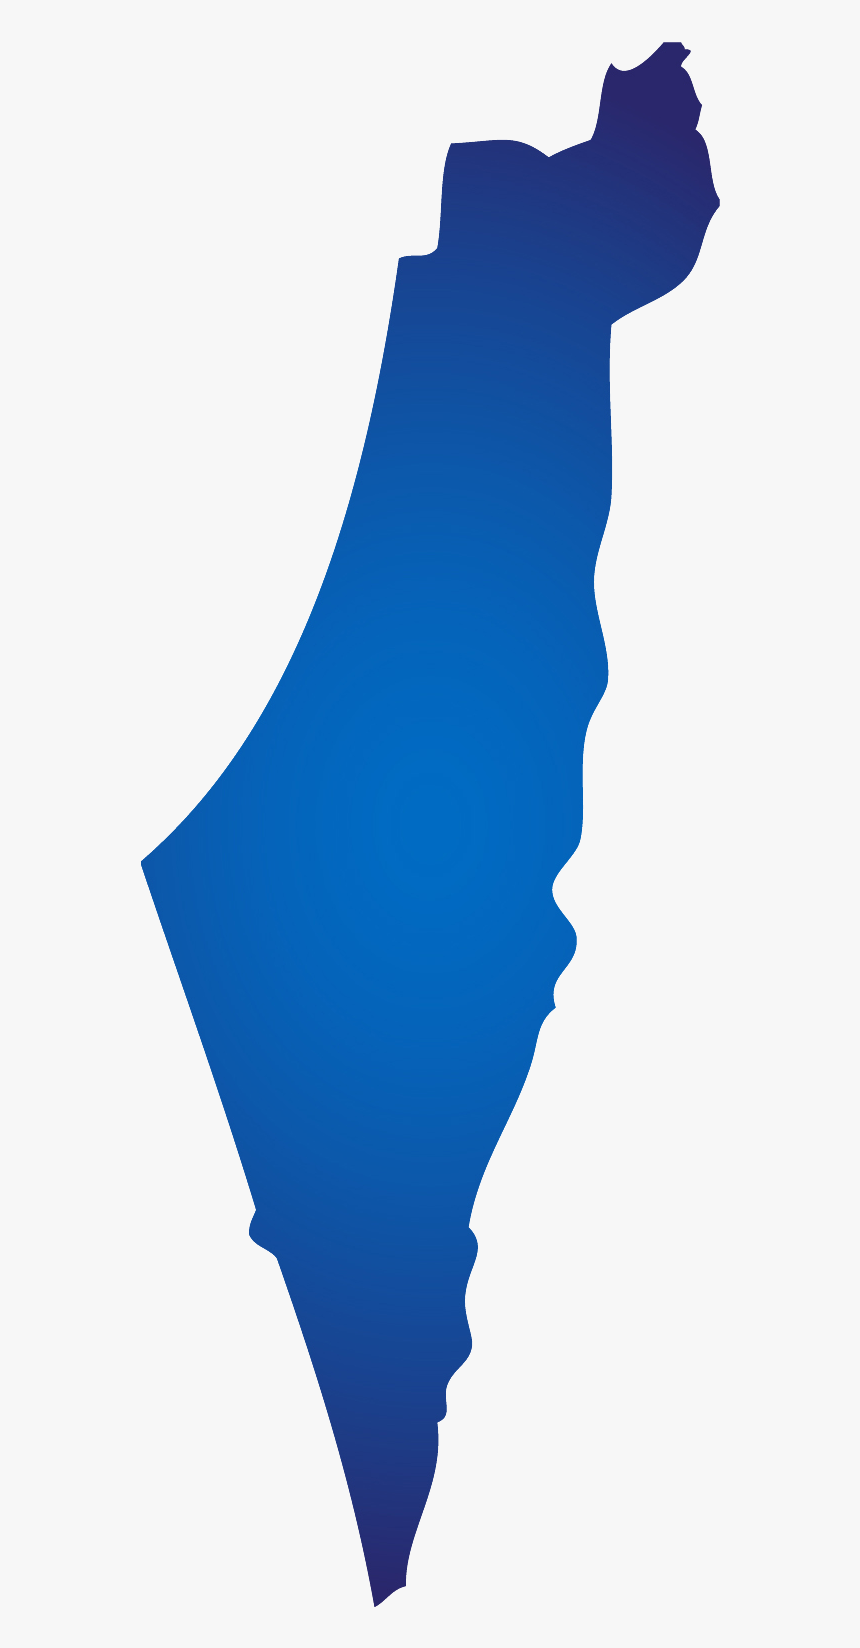 Israel Map No Background, HD Png Download, Free Download